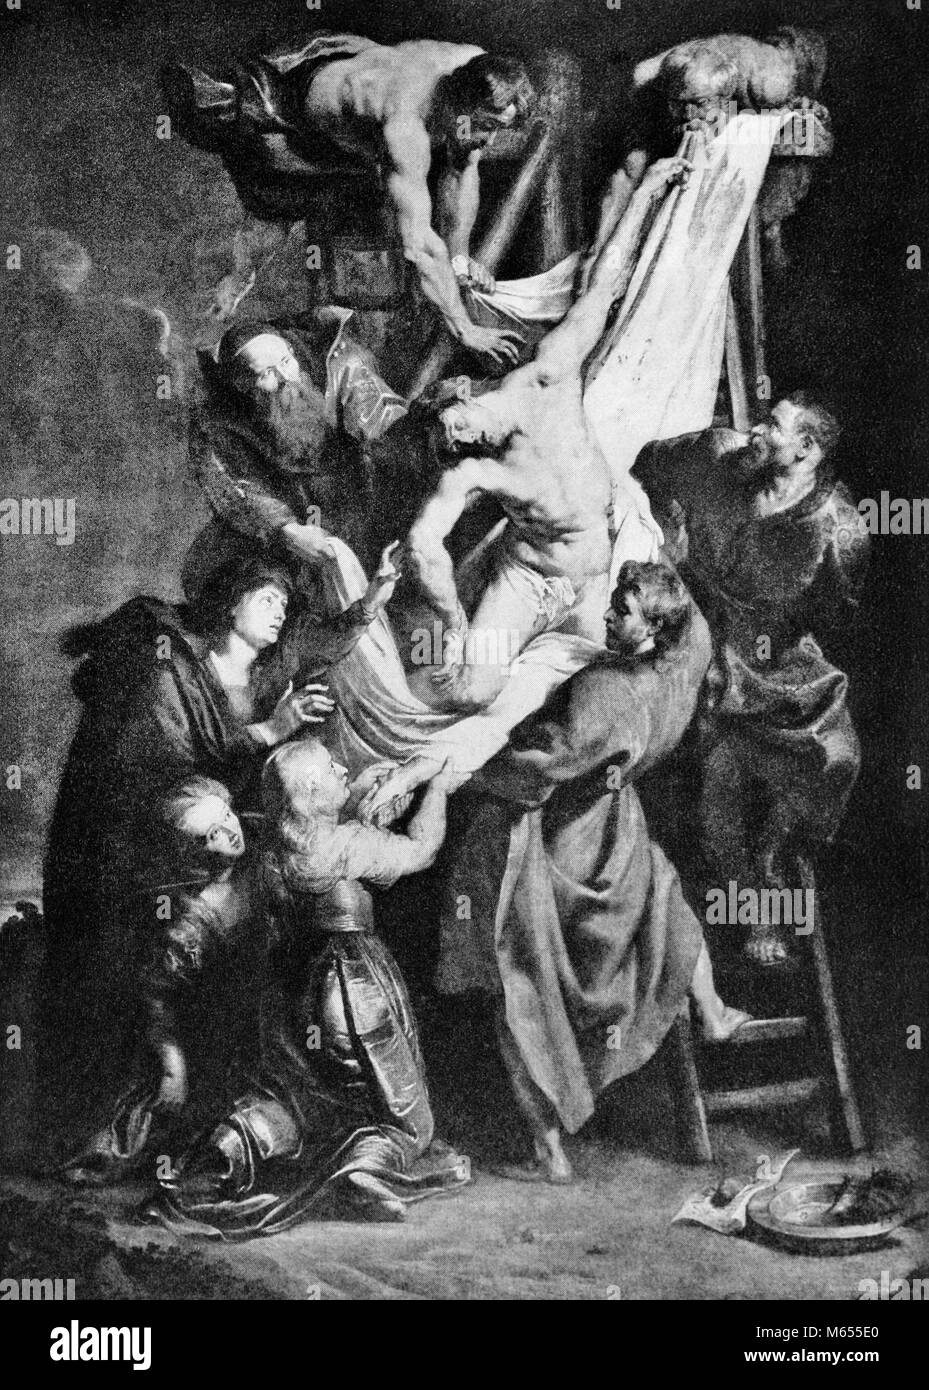 1600s 17th CENTURY PAINTING JESUS DESCENT FROM THE CROSS BY PETER PAUL RUBENS - a3779 HAR001 HARS 1600s MALES 33 AD/CE B&W BLACK AND WHITE CRUCIFIED DESCENT JESUS CHRIST NEW TESTAMENT OLD FASHIONED PERSONS RUBENS Stock Photo